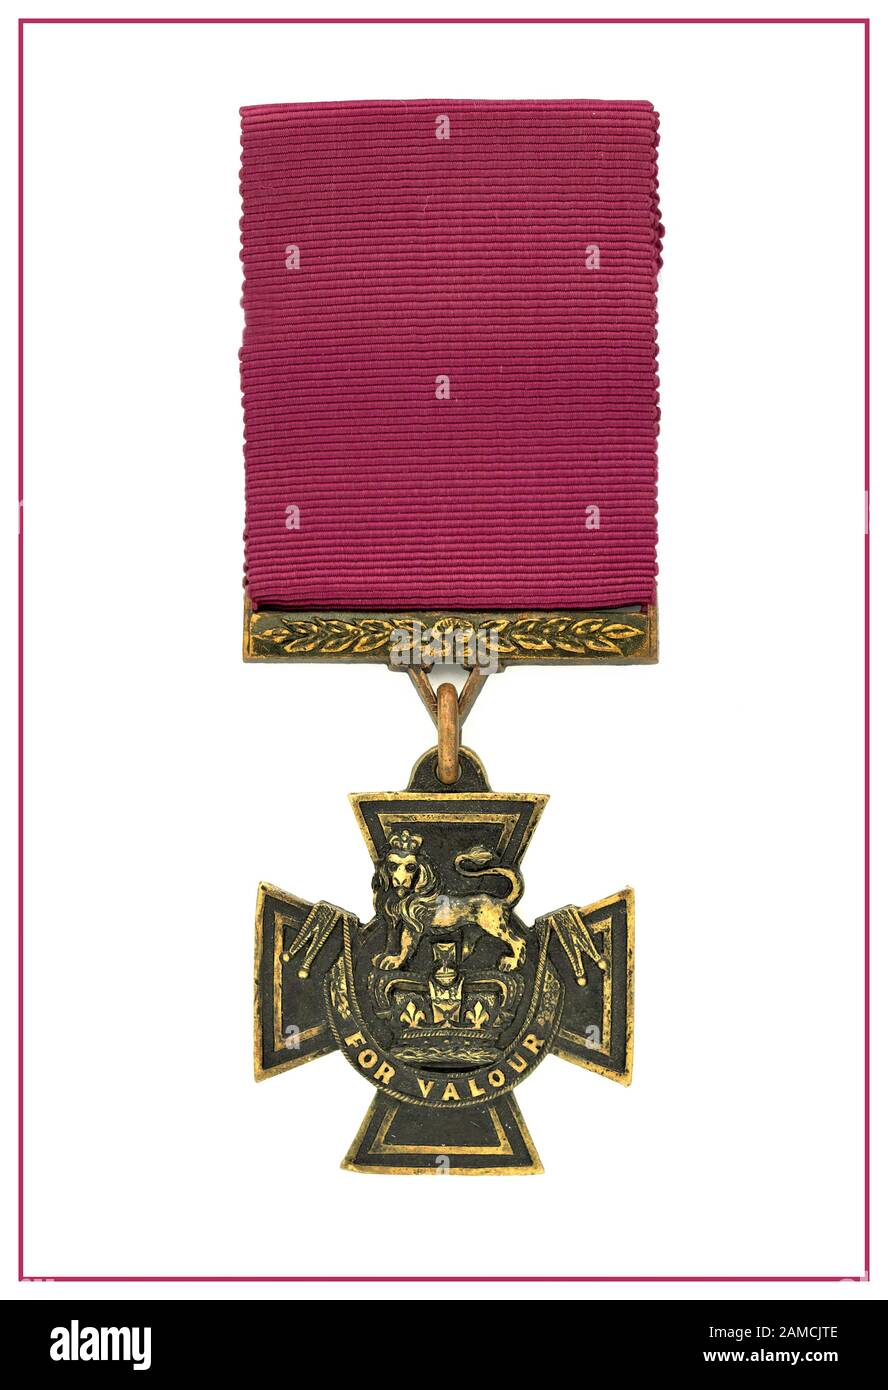 Victoria Cross Medal awarded for Conspicuous Valour. The UK’s highest military award for bravery in the face of the enemy. The Victoria Cross (VC) is the highest and most prestigious award of the British honours system, most conspicuous bravery, or some daring or pre-eminent act of valour or self-sacrifice, or extreme devotion to duty in the presence of the enemy. Stock Photo